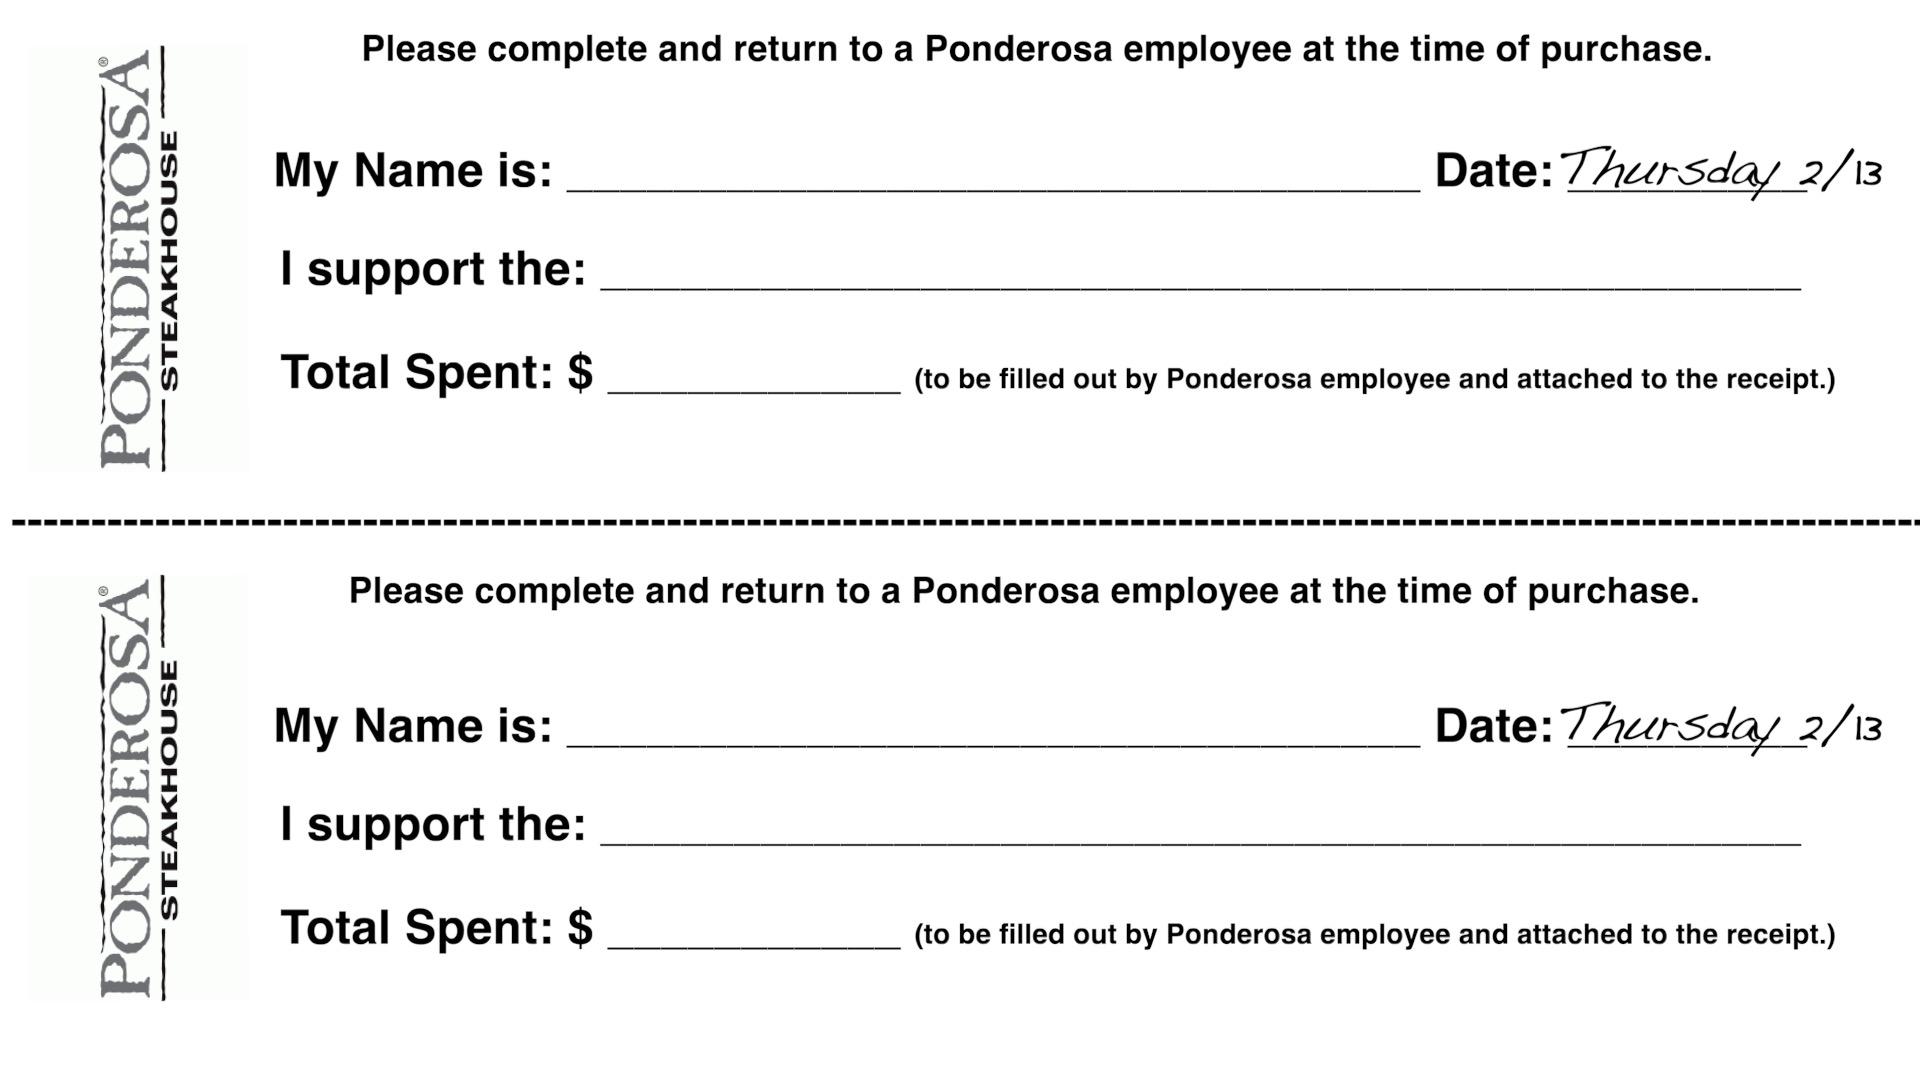 (Two Coupons) Ponderosa® Steakhouse coupon-Please complete and return to a Ponderosa® employee at the time of purchase. My Name is: Date: Thursday, 2/13-I support the: Total Spent: (to be filled out by Ponderosa® employee and attached to the receipt.